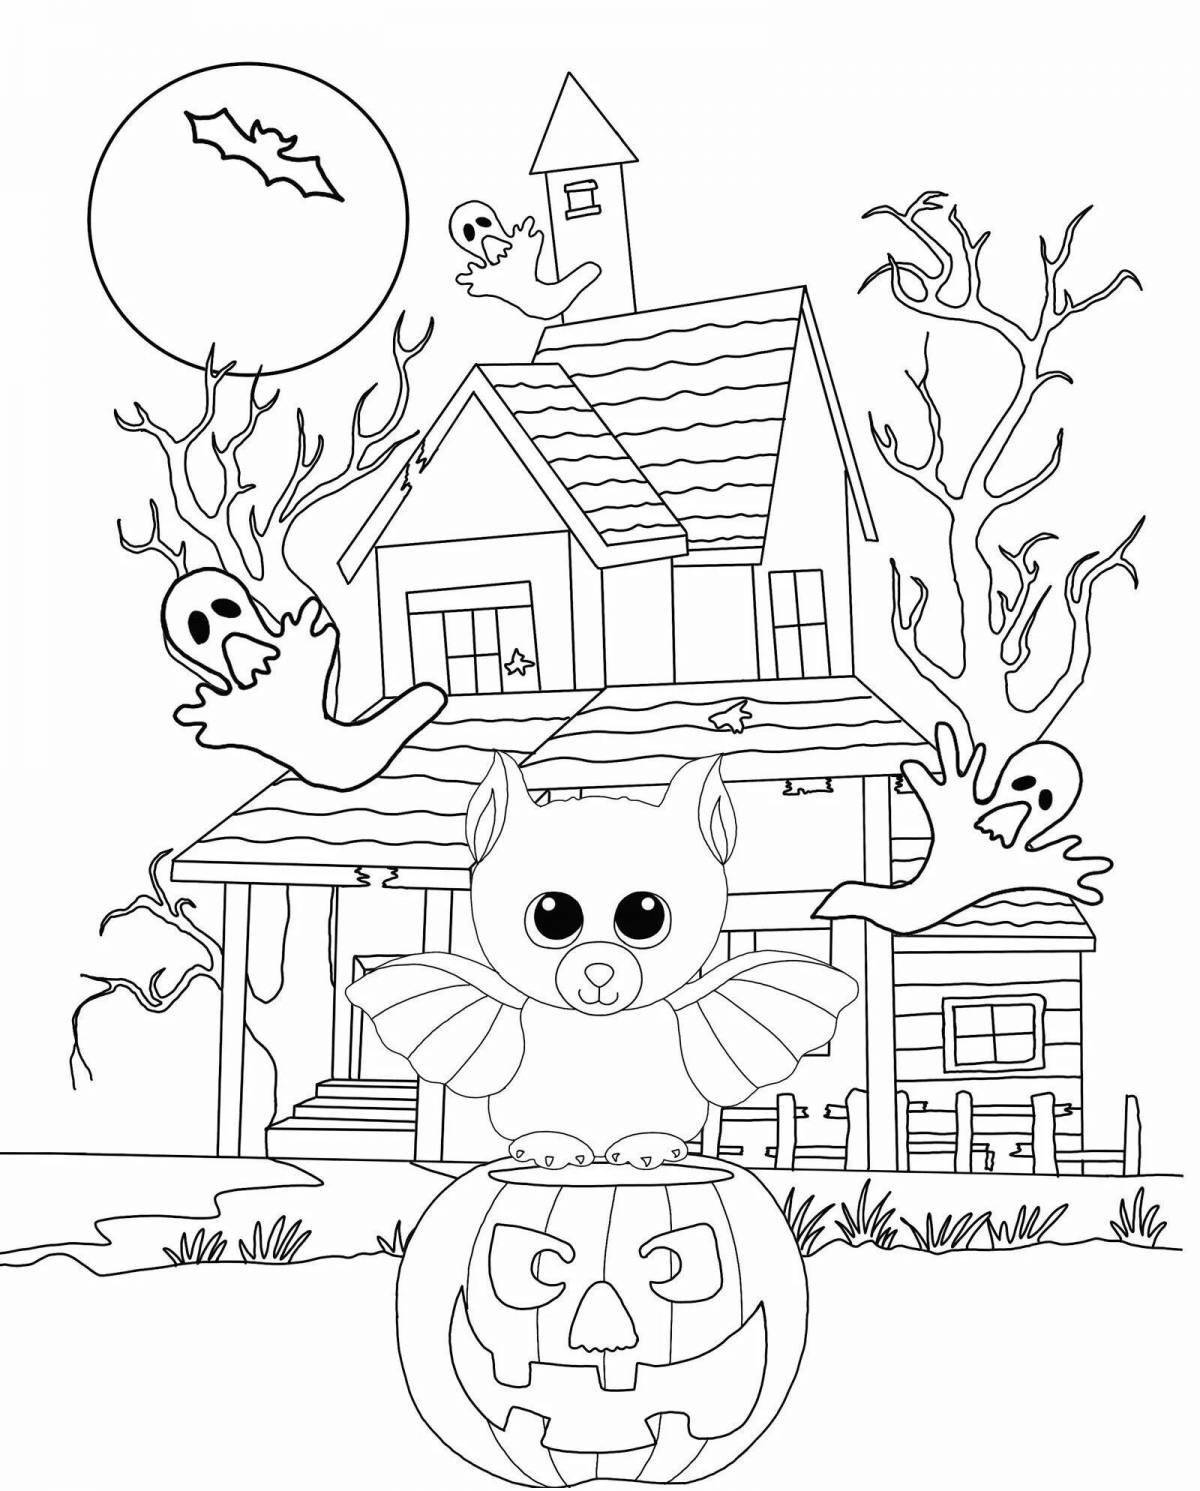 Shocking halloween house coloring page